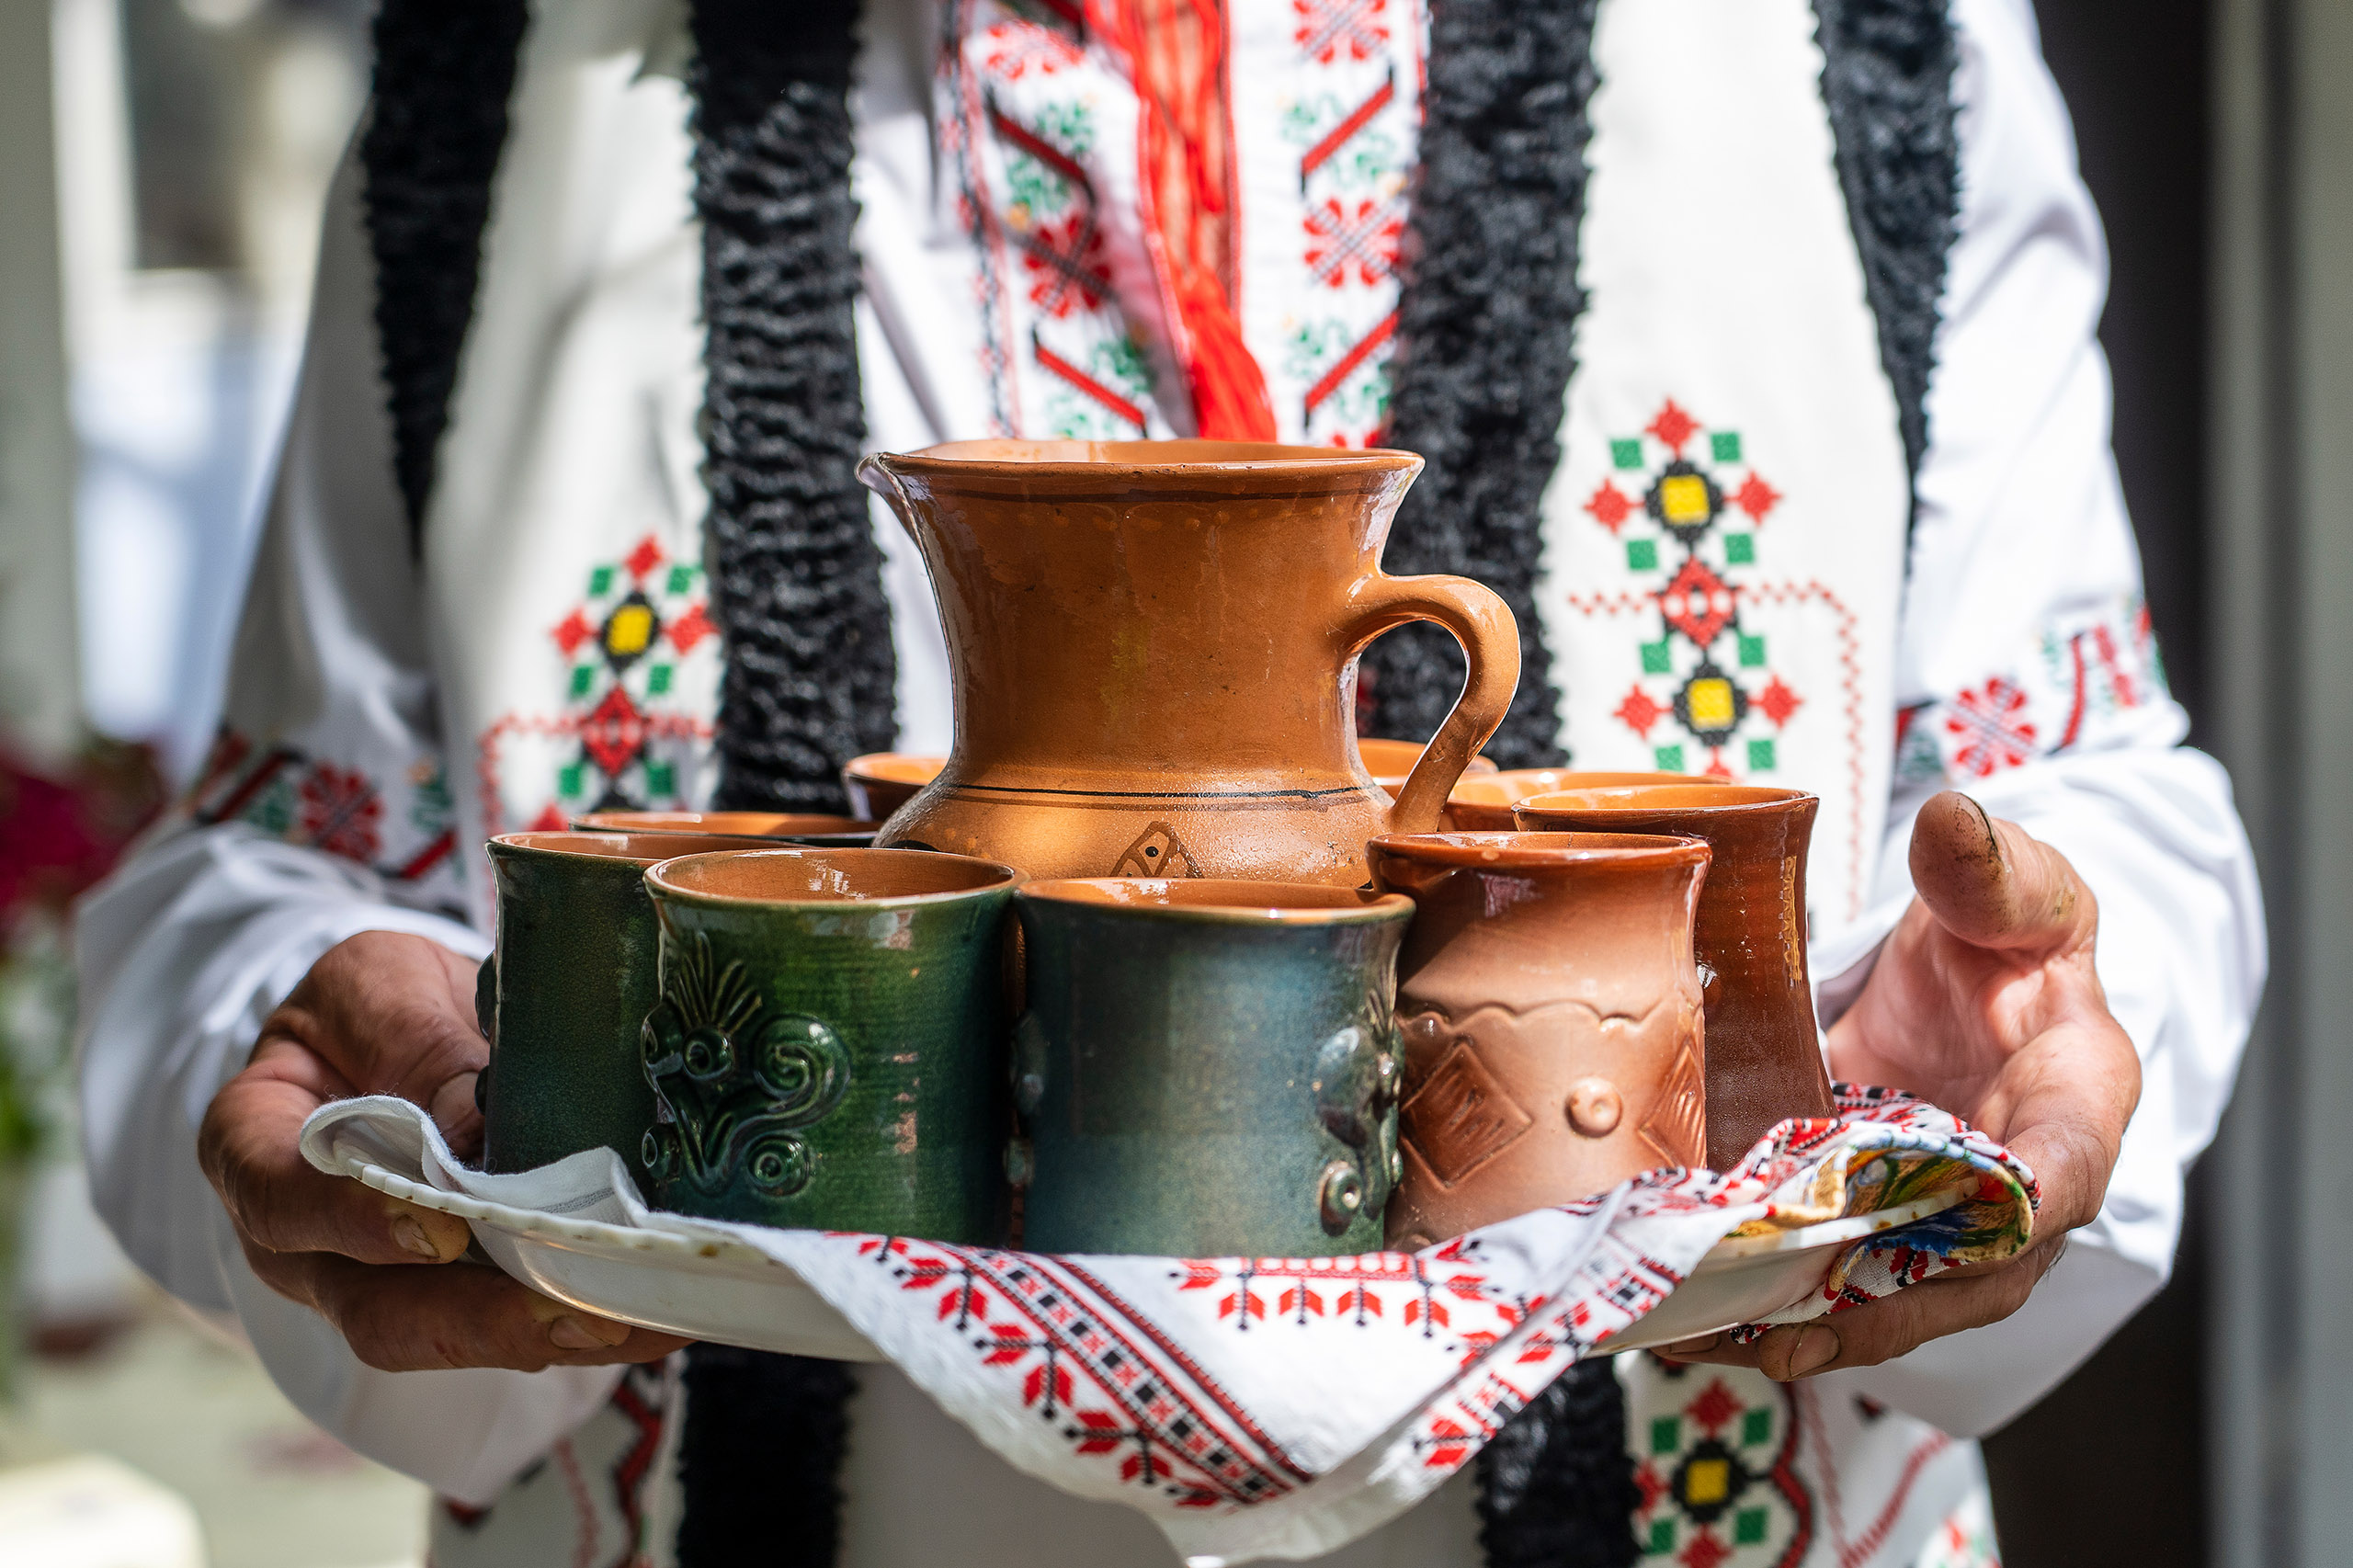 Moldovan man greets dear guests and invites them to drink homemade wine, close up. The hands of a man holding an earthenware jug with wine and glasses on a tray